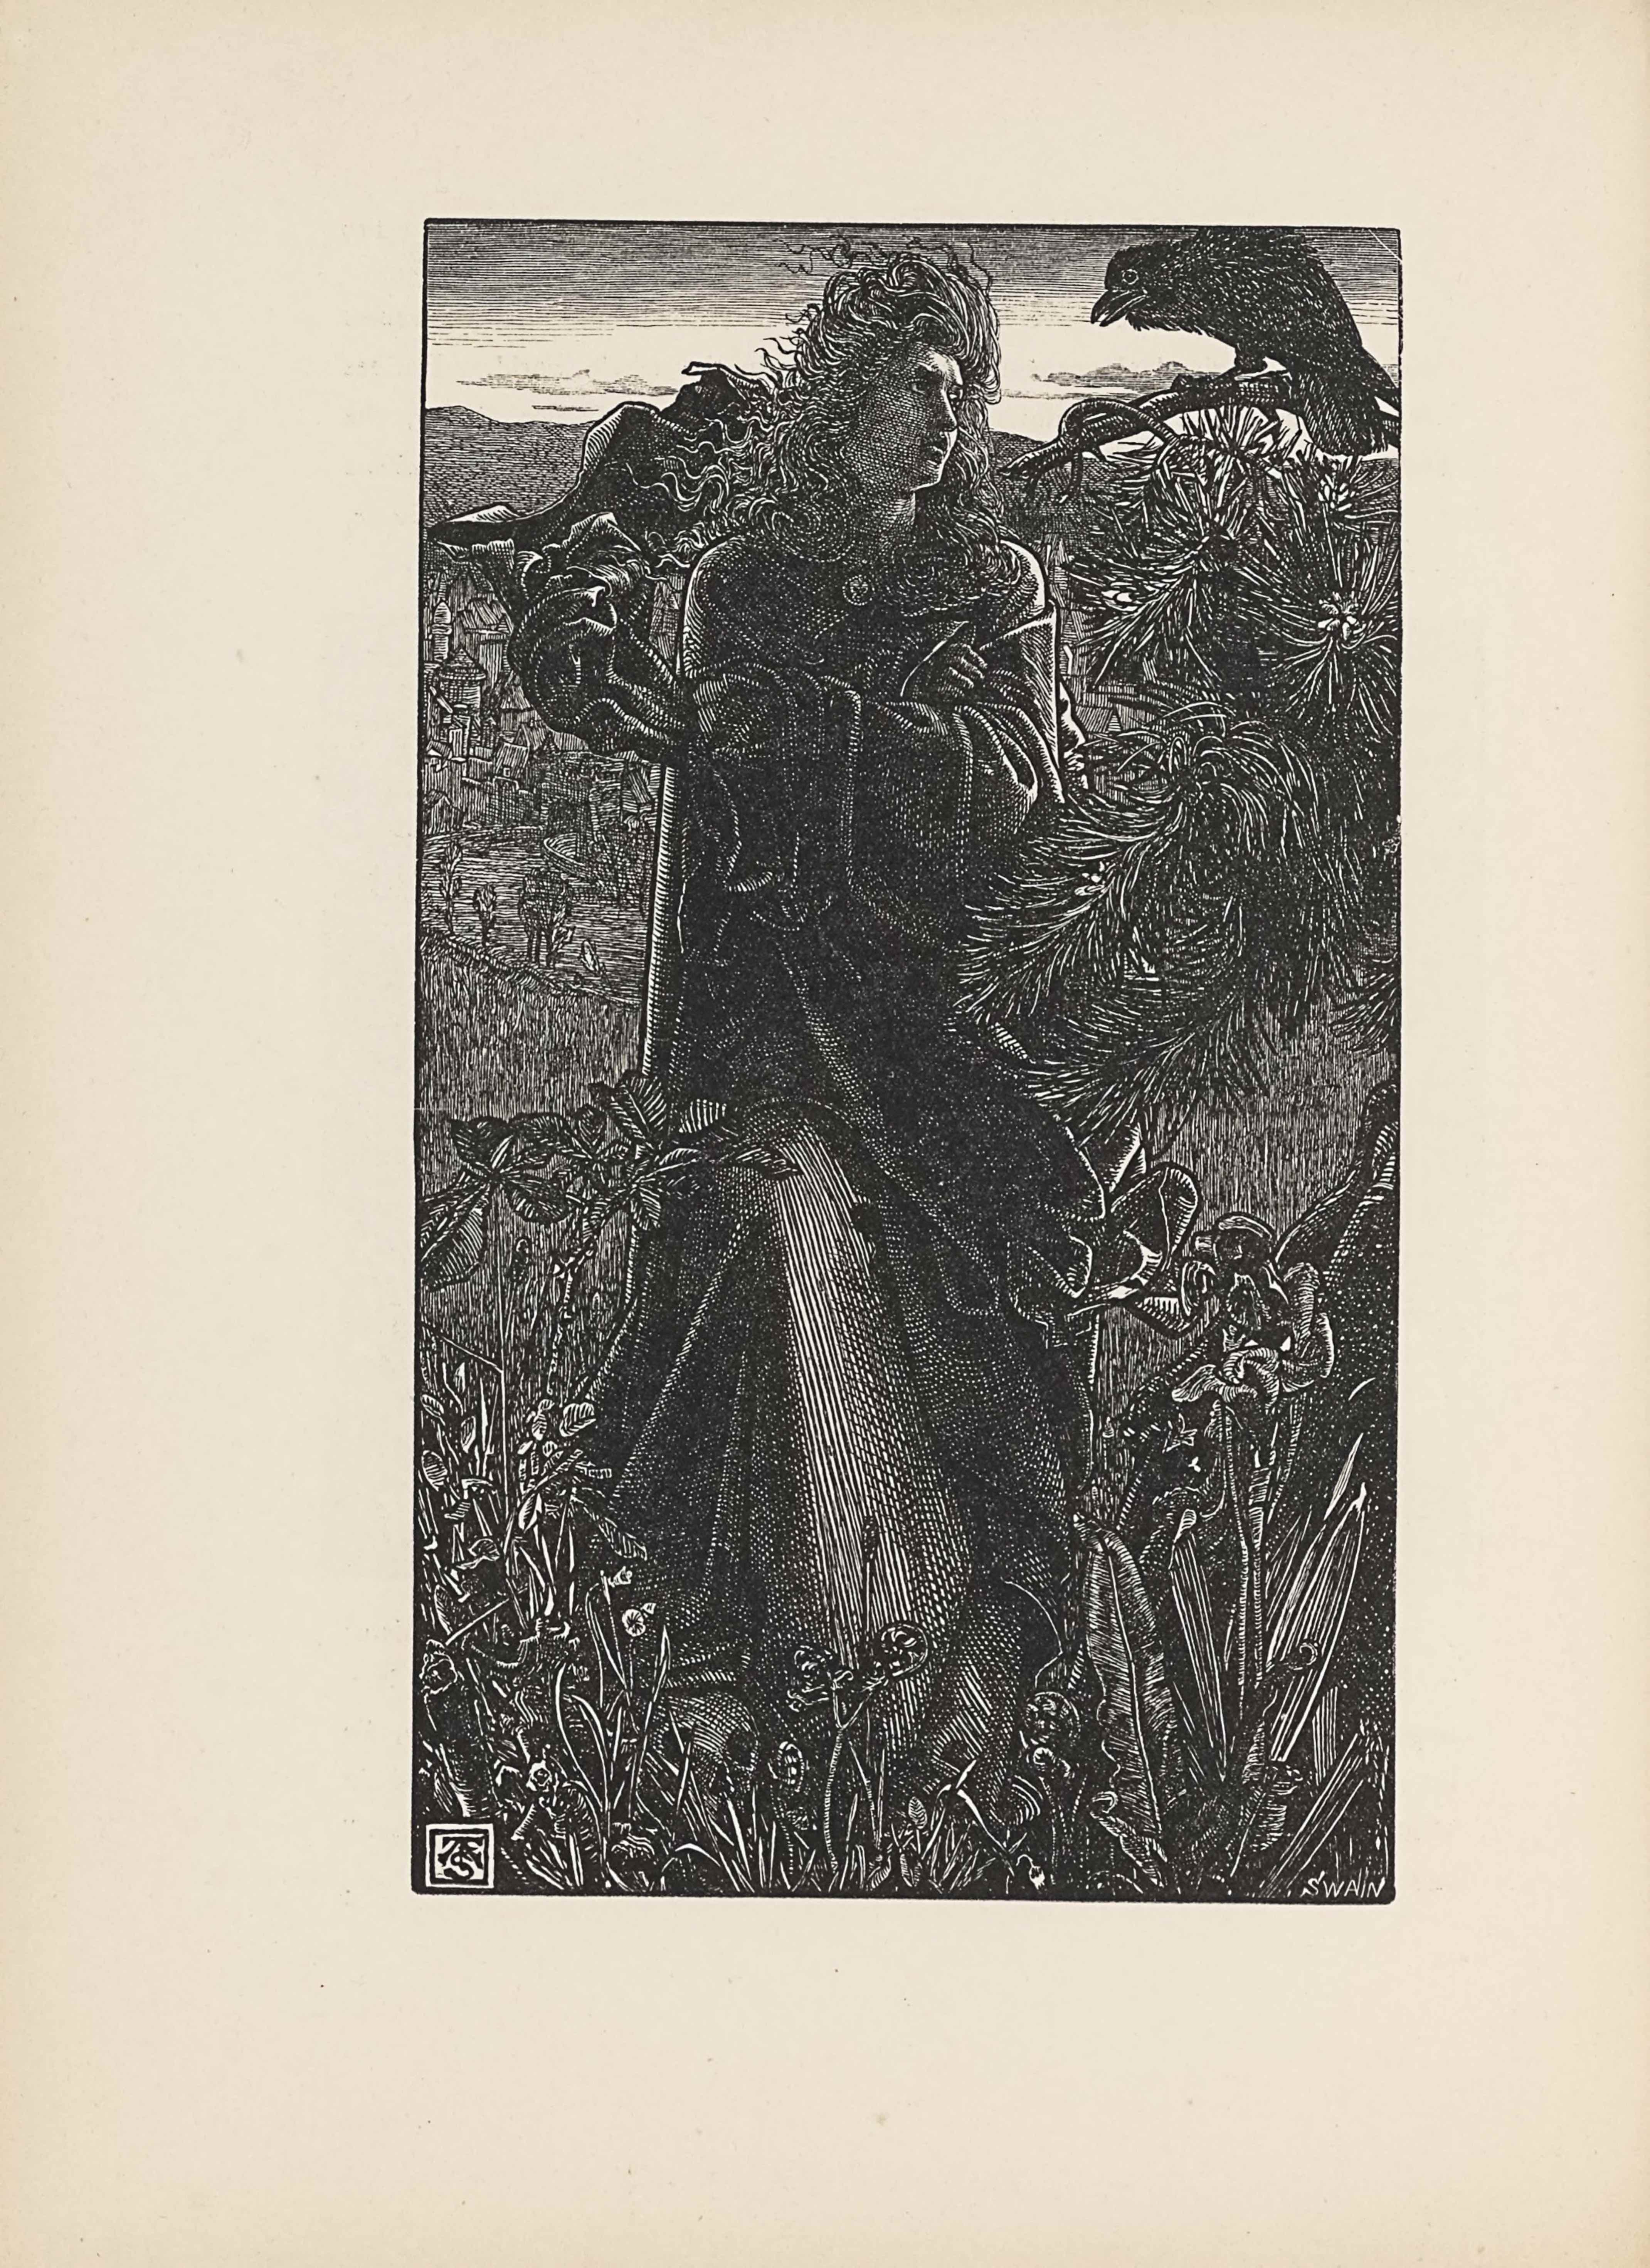 This line-block reproduction of a wood-engraved image is in portrait orientation. A man stands tall in the middle of the image on top of a hill, holding onto a scarf billowing in the strong wind and looking at a crow sitting on a branch. The man spans from the base to the top of the page in height and takes up about half of the width. In the foreground are various plants and twigs springing up and covering his feet. One plant rises up taller than the others on the left, reaching about his waist in height. The man is centered in the page. He is wearing a baggy coat that reaches the ground but is split slightly at the waist to reveal a sliver of her long, lighter-coloured robe. The coat has baggy sleeves that hang far below his left arm, which is positioned up horizontally across his body. He is holding onto a scarf that billows behind him on the left side of the page. His right arm is crossed underneath his left. The coat he wears is tied together at the neck with a single button. His hair is wavy and blown back from his face in a sort of mane from the wind. His face is turned towards the right of the page and tilted slightly up, showing a three-quarters profile. He looks at a crow that sits slightly above eye-level on a branch extending out from the top right corner of the page. The crow is bigger than the man’s head and looks back at him, leaning forward on the branch. The branches of an evergreen tree with pine needles stick out below the bare branch upon which the crow sits. In the background of the man and the crow is a faintly outlined city made up of many little houses, which seem to be at the bottom of the hill they are on. Behind the city is a skyline with a few clouds and a dark upper edge. In the bottom left corner a small logo appears in a doubly-lined square that has the letters “F” “A” and “S” scripted over top of each other; this is the monogram signature of the artist, Frederick Augustus Sandys. In the bottom right corner the word “SWAIN” [caps] appears in a light colour contrasted with the dark ferns behind it; this is the signature of the wood engraver.